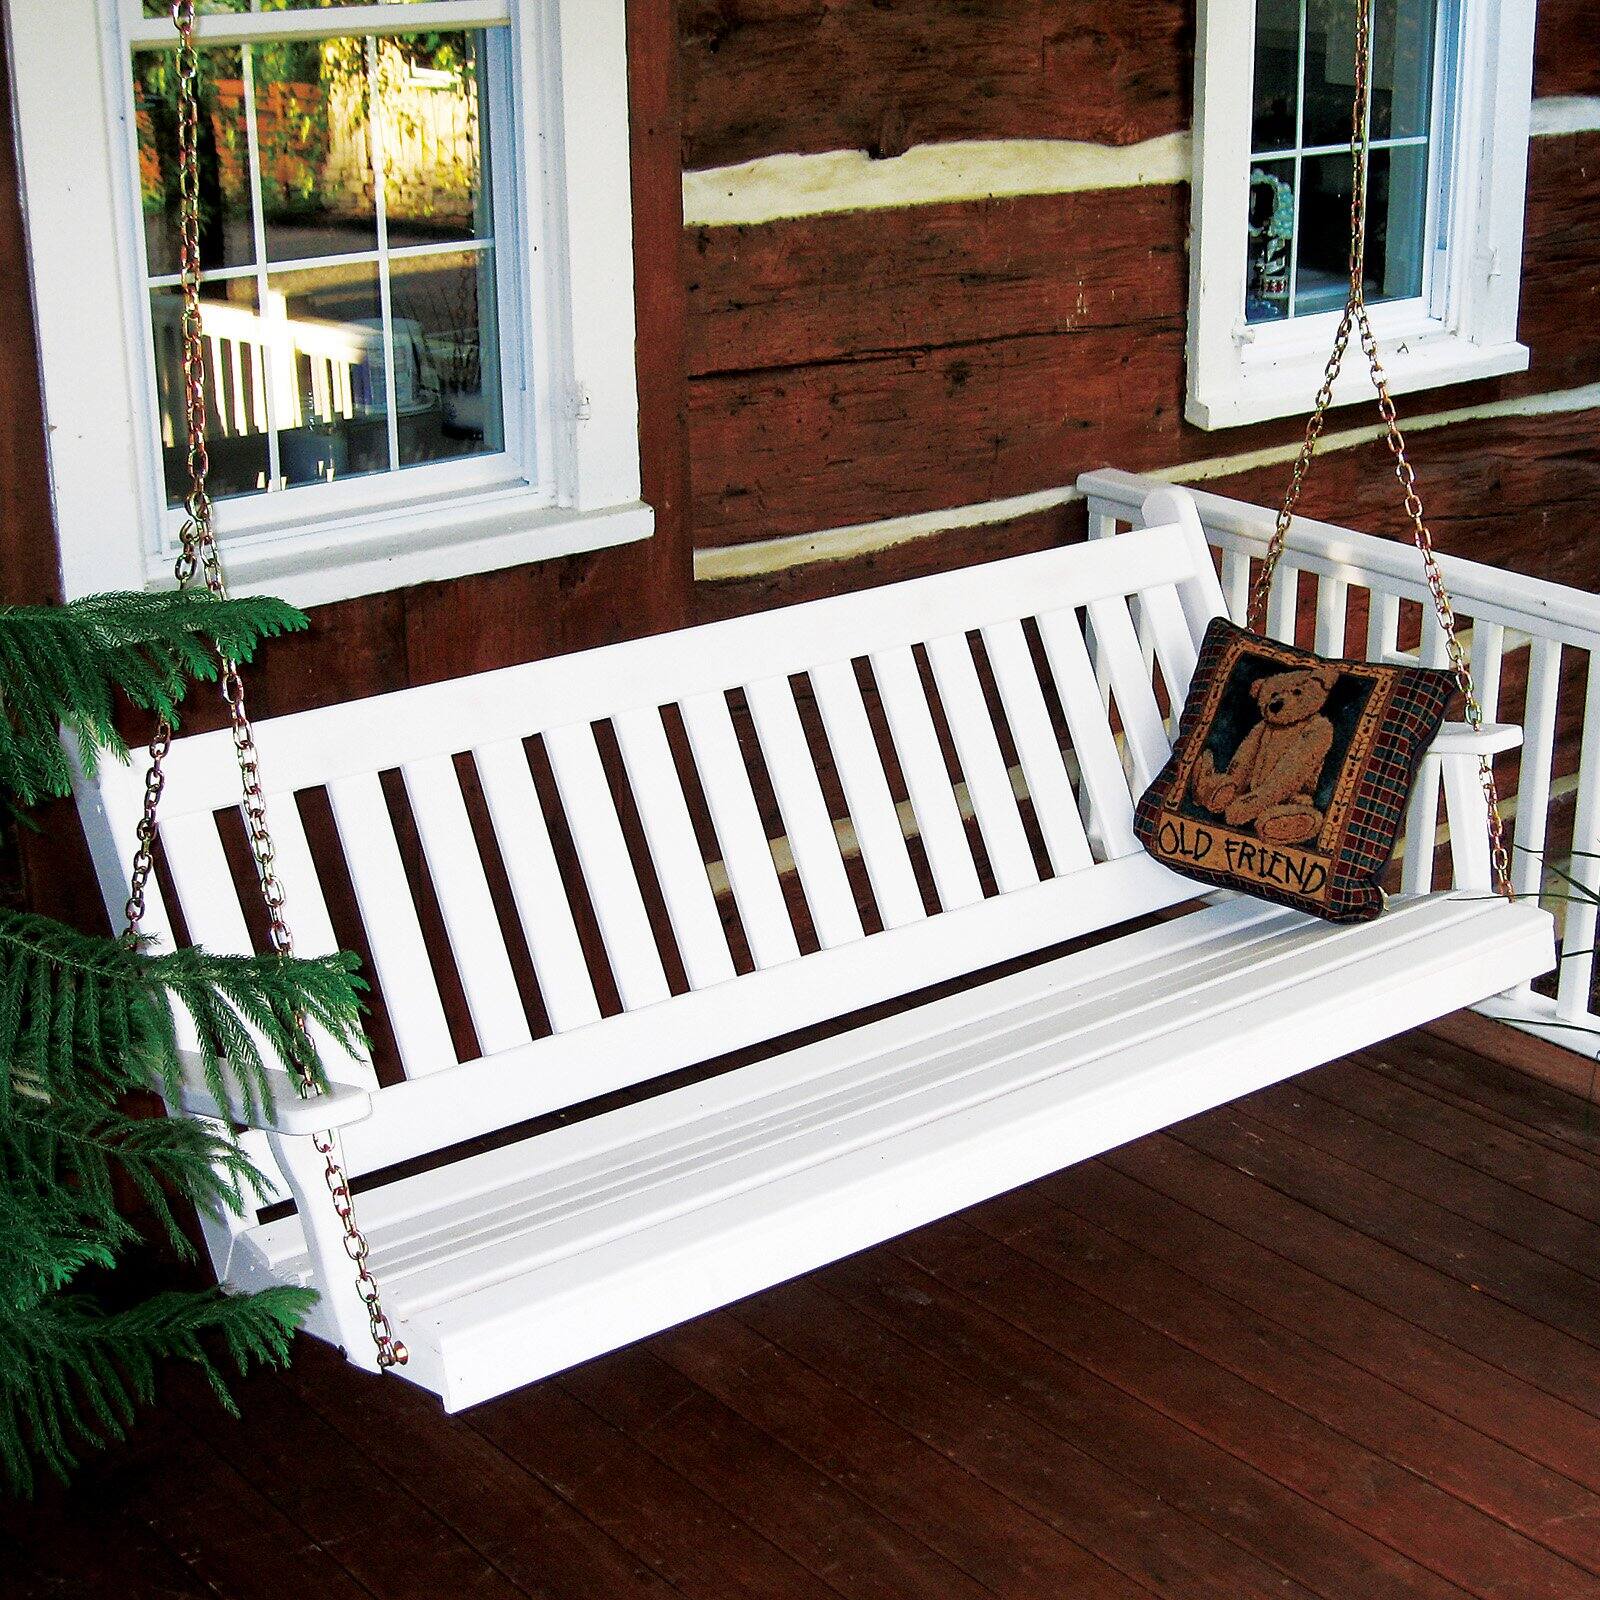 A &amp; L Furniture Yellow Pine Traditional English Porch Swing - image 1 of 2